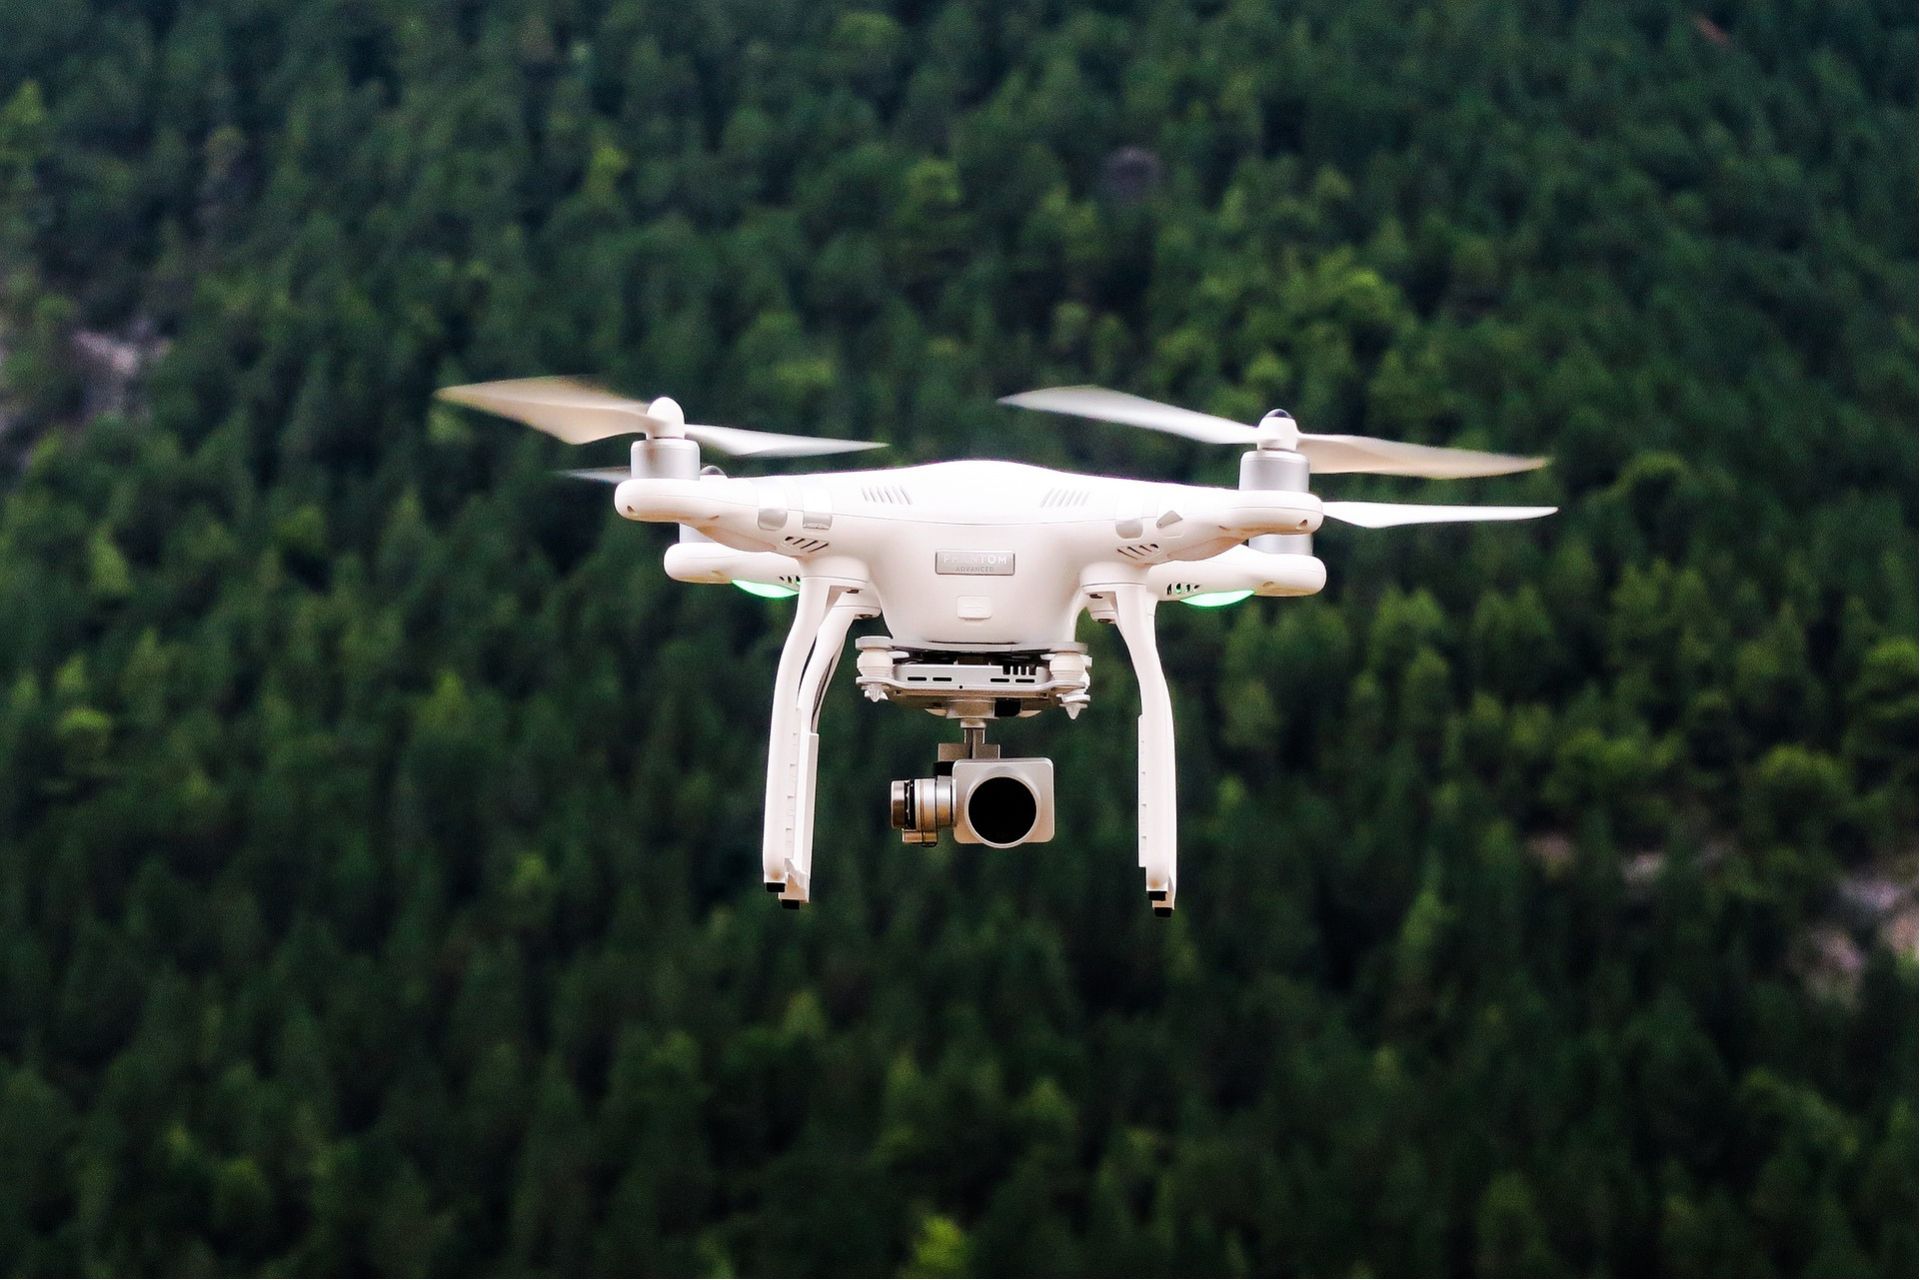 A photo of a drone above a forest